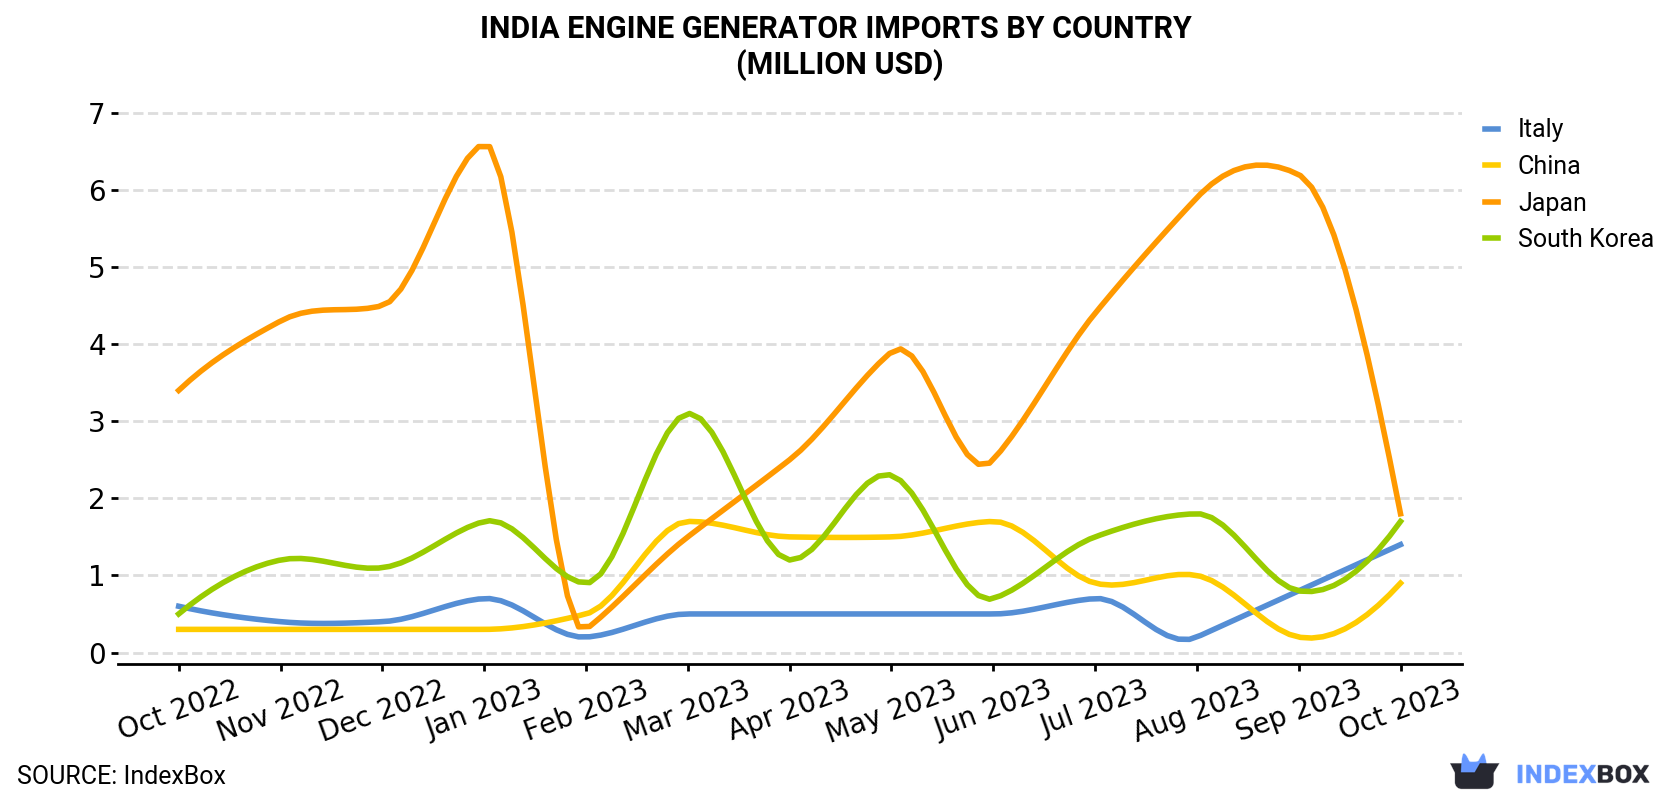 India Engine Generator Imports By Country (Million USD)